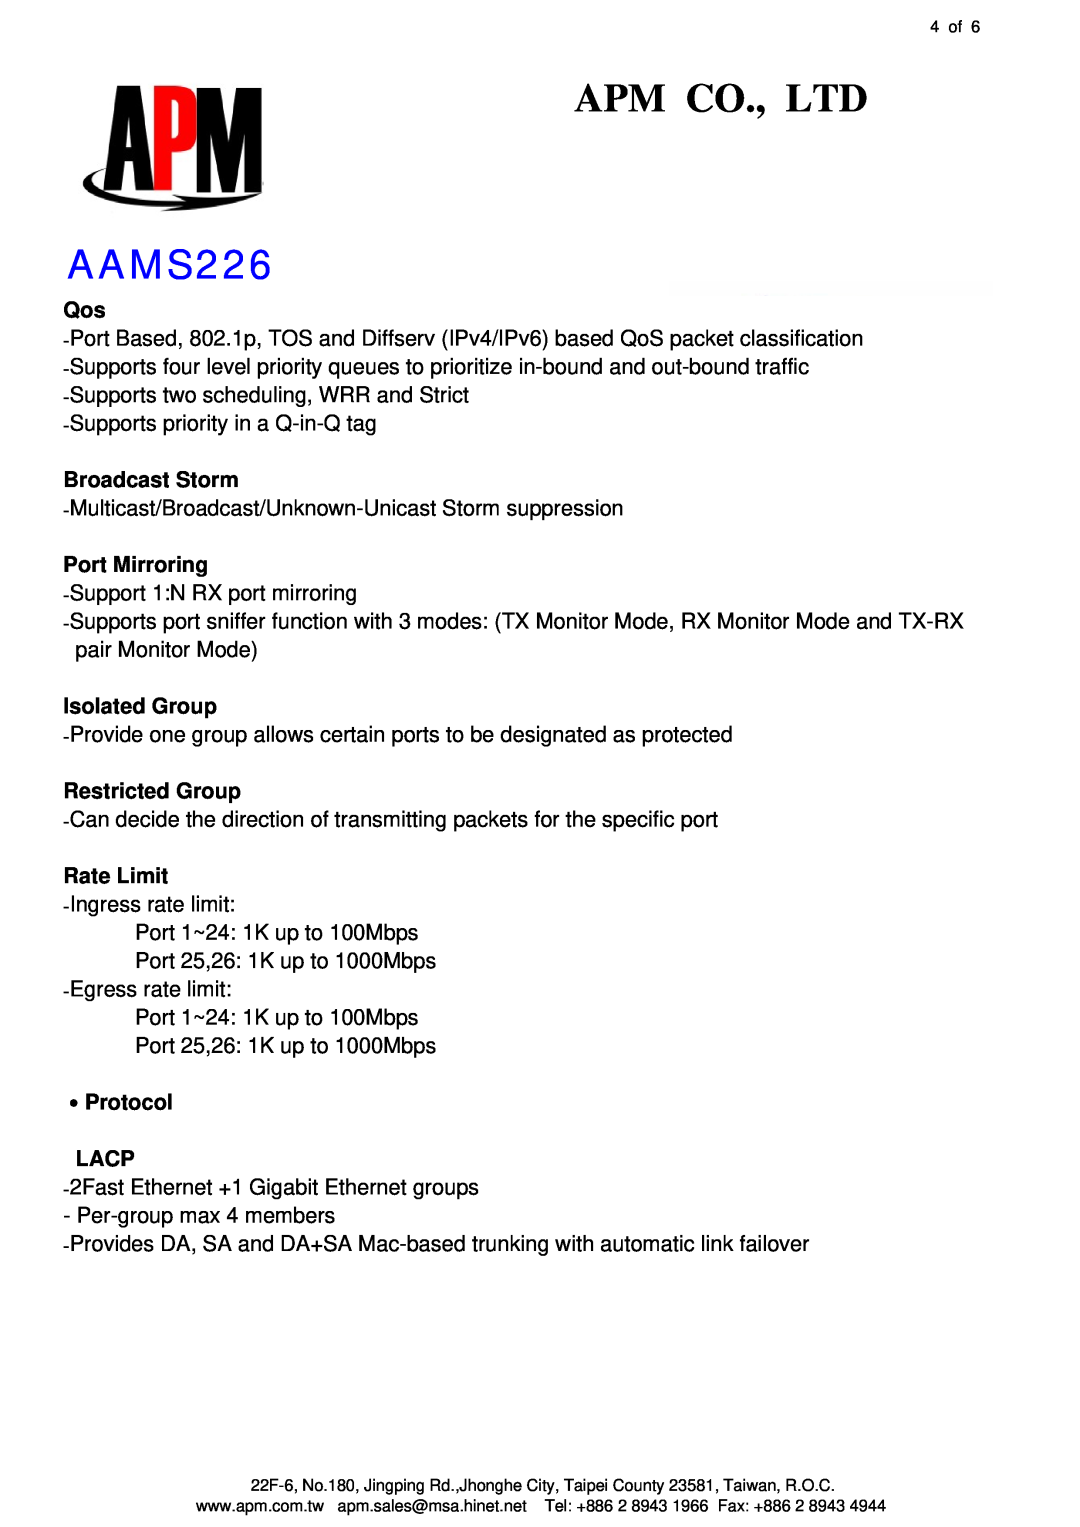 APM AAMS226 specifications Broadcast Storm, Port Mirroring, Isolated Group, Restricted Group, Rate Limit, ․Protocol LACP 